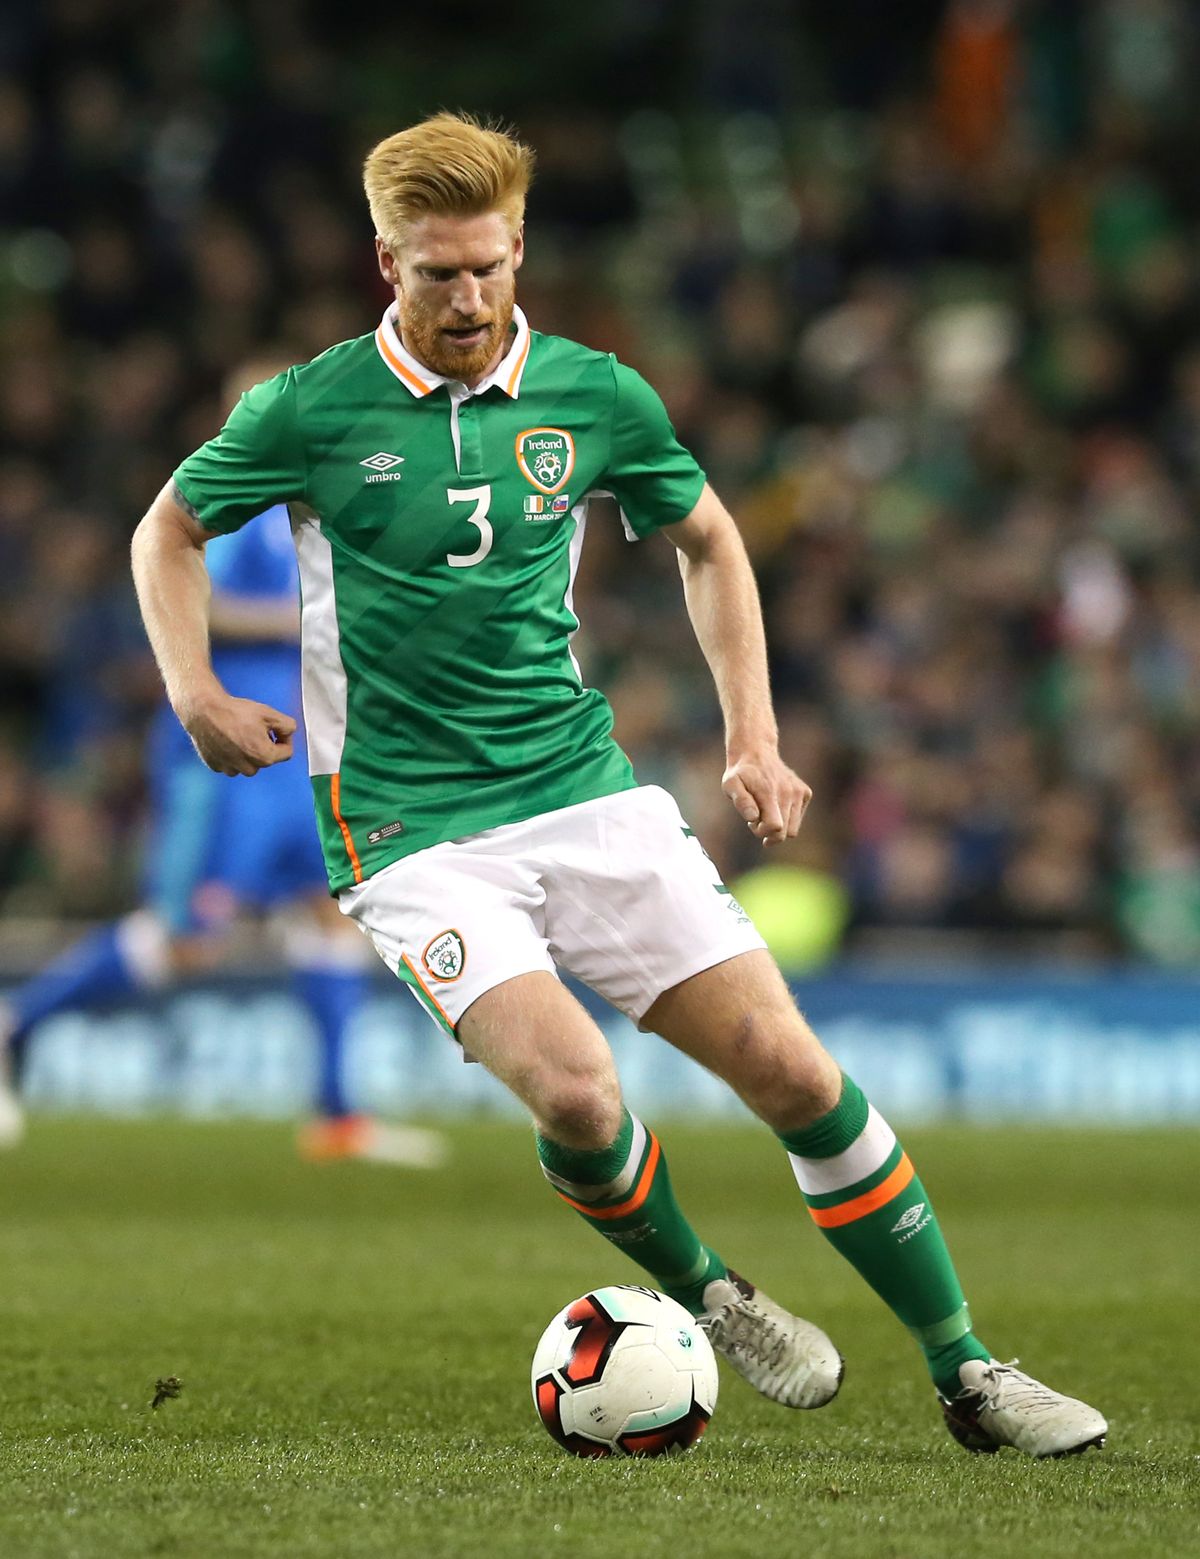 It’s a great way to end my playing days – Paul McShane turns to coaching